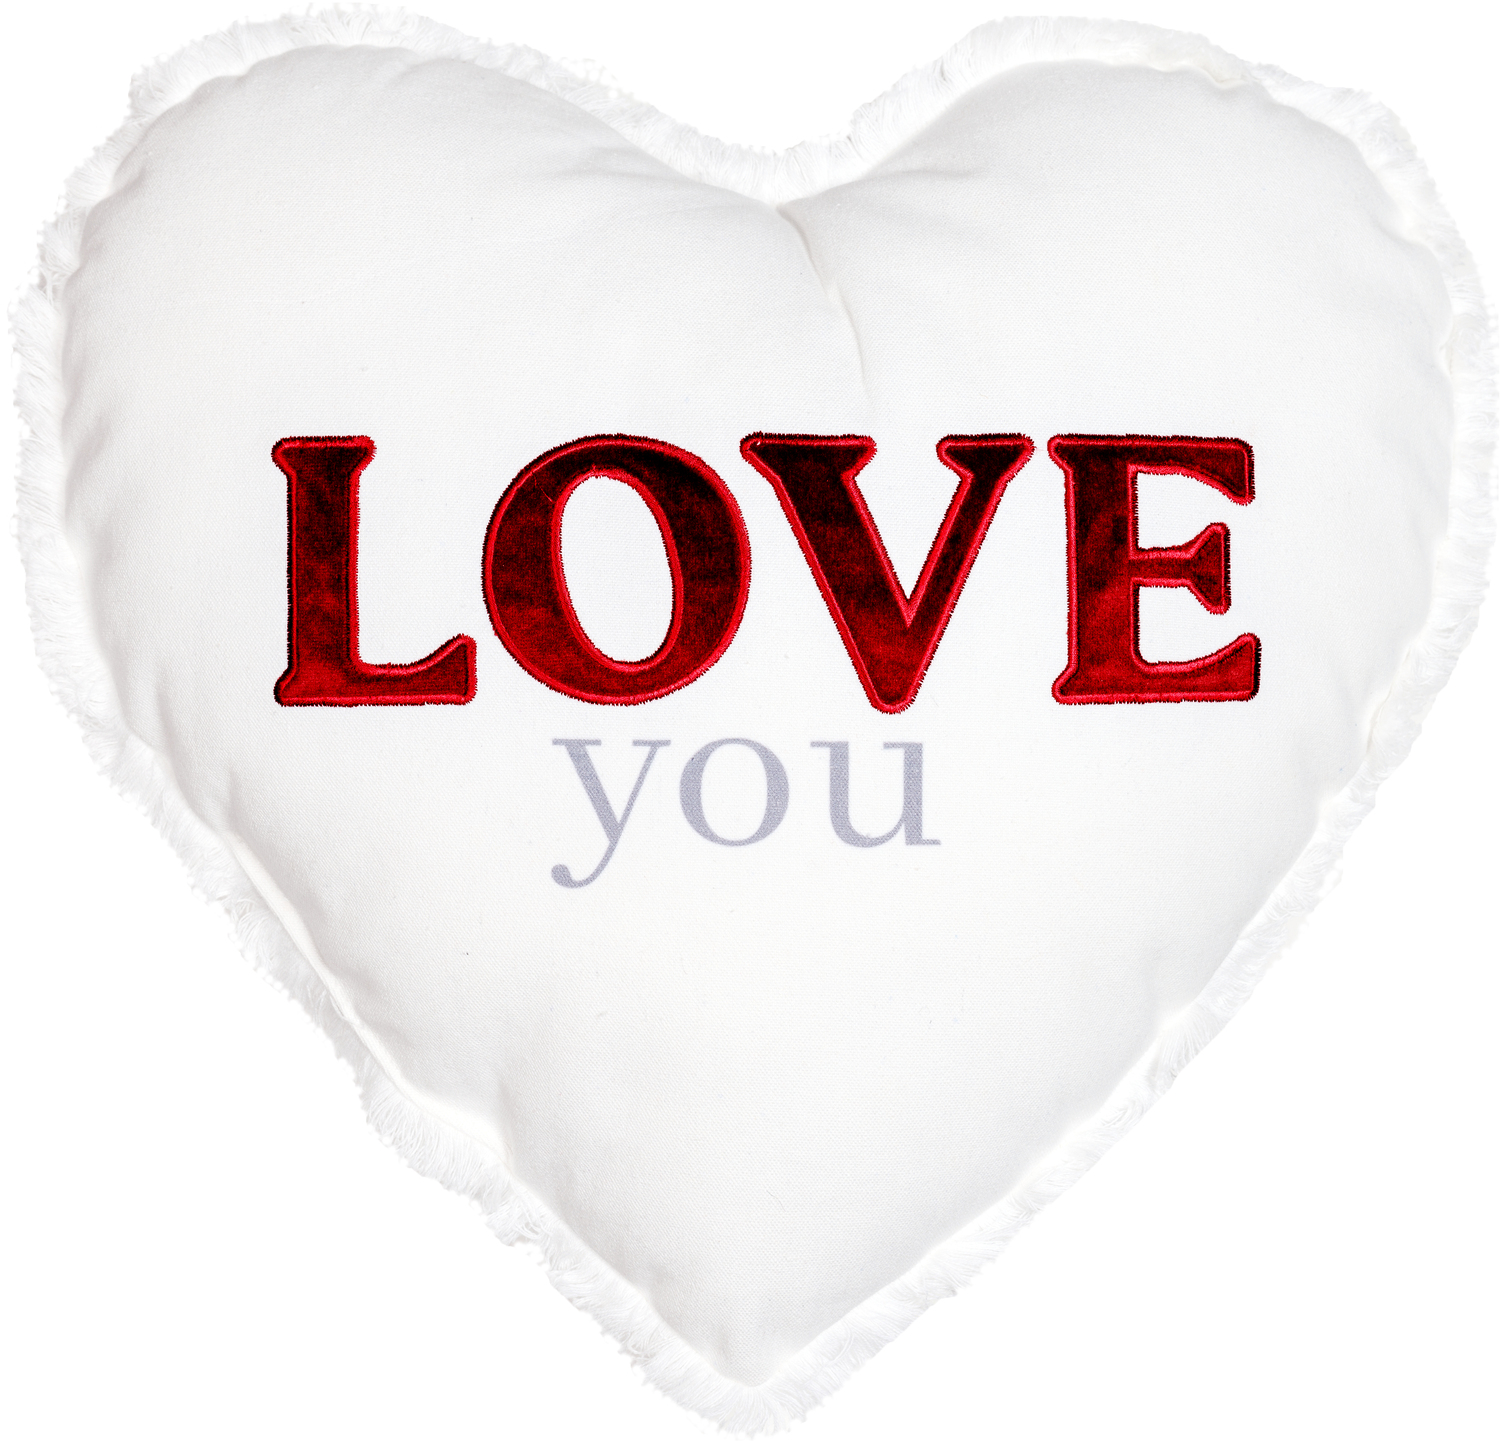 Love by Tossing Words Around - Love - 18" Heart Pillow